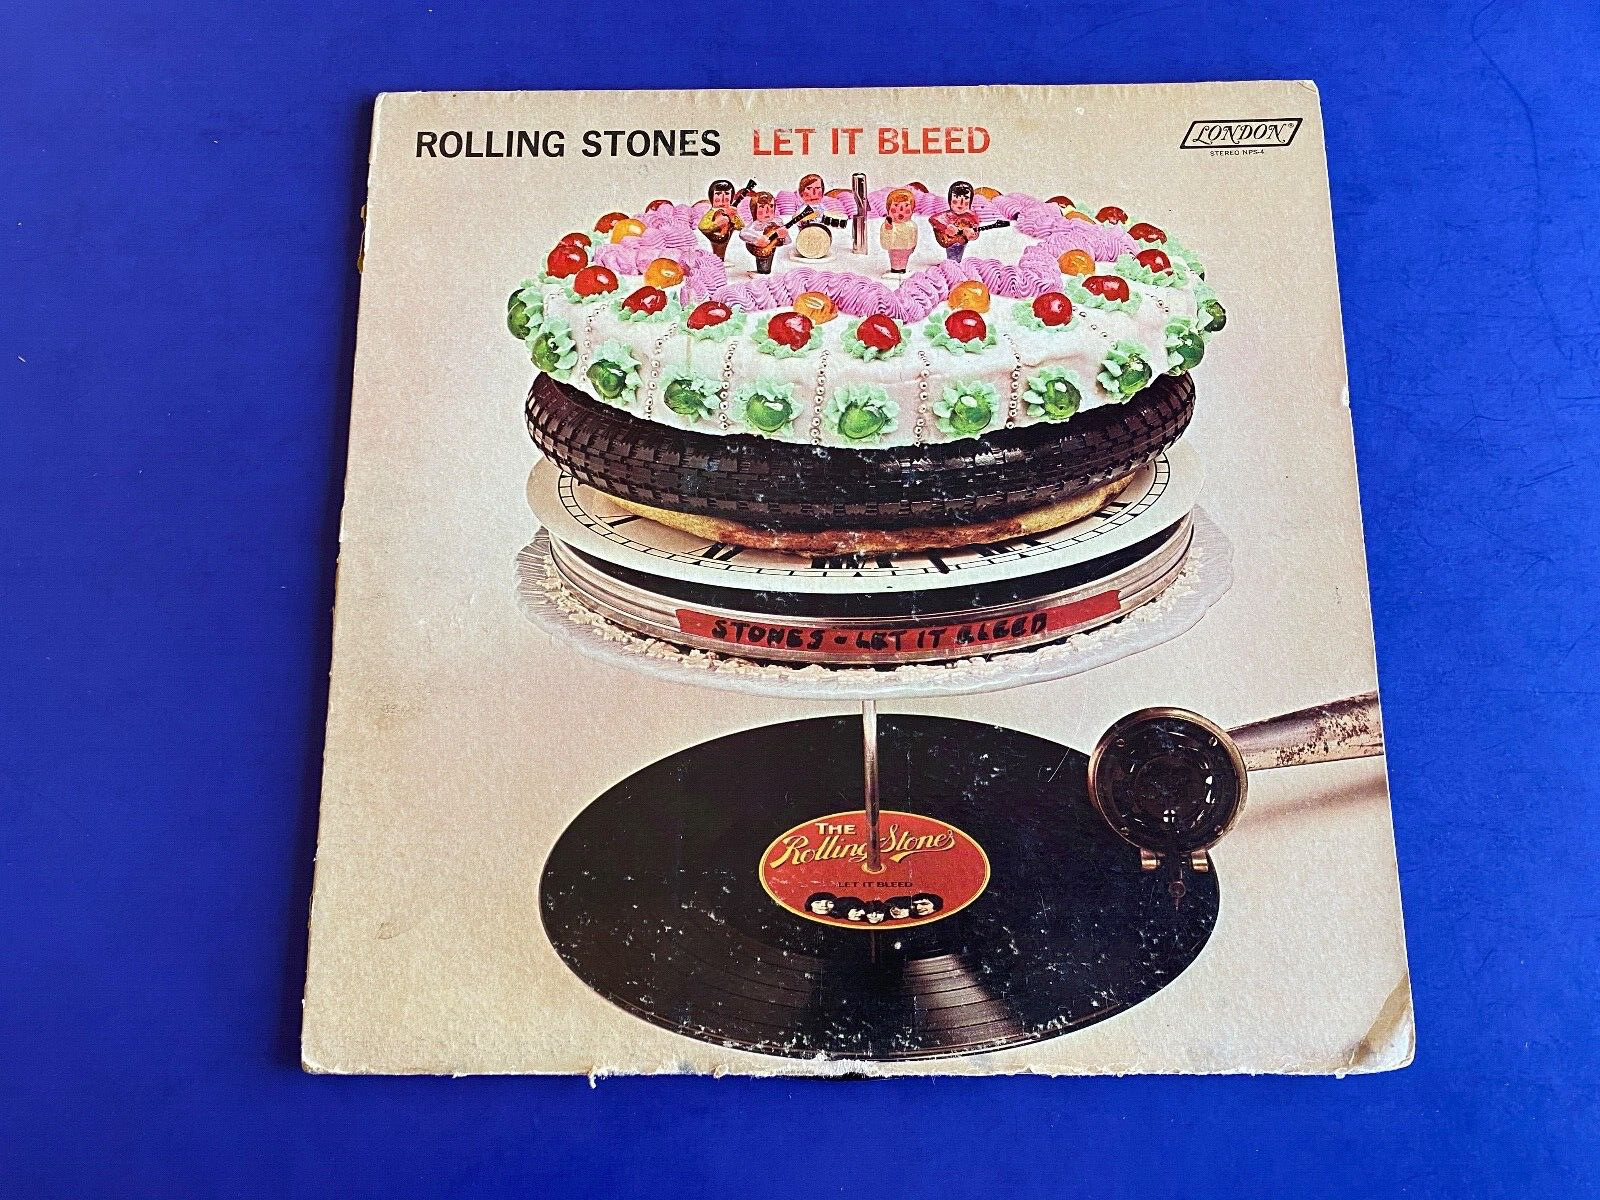 ROLLING STONES Let it bleed London NPS-4 1969 tested VG/VG